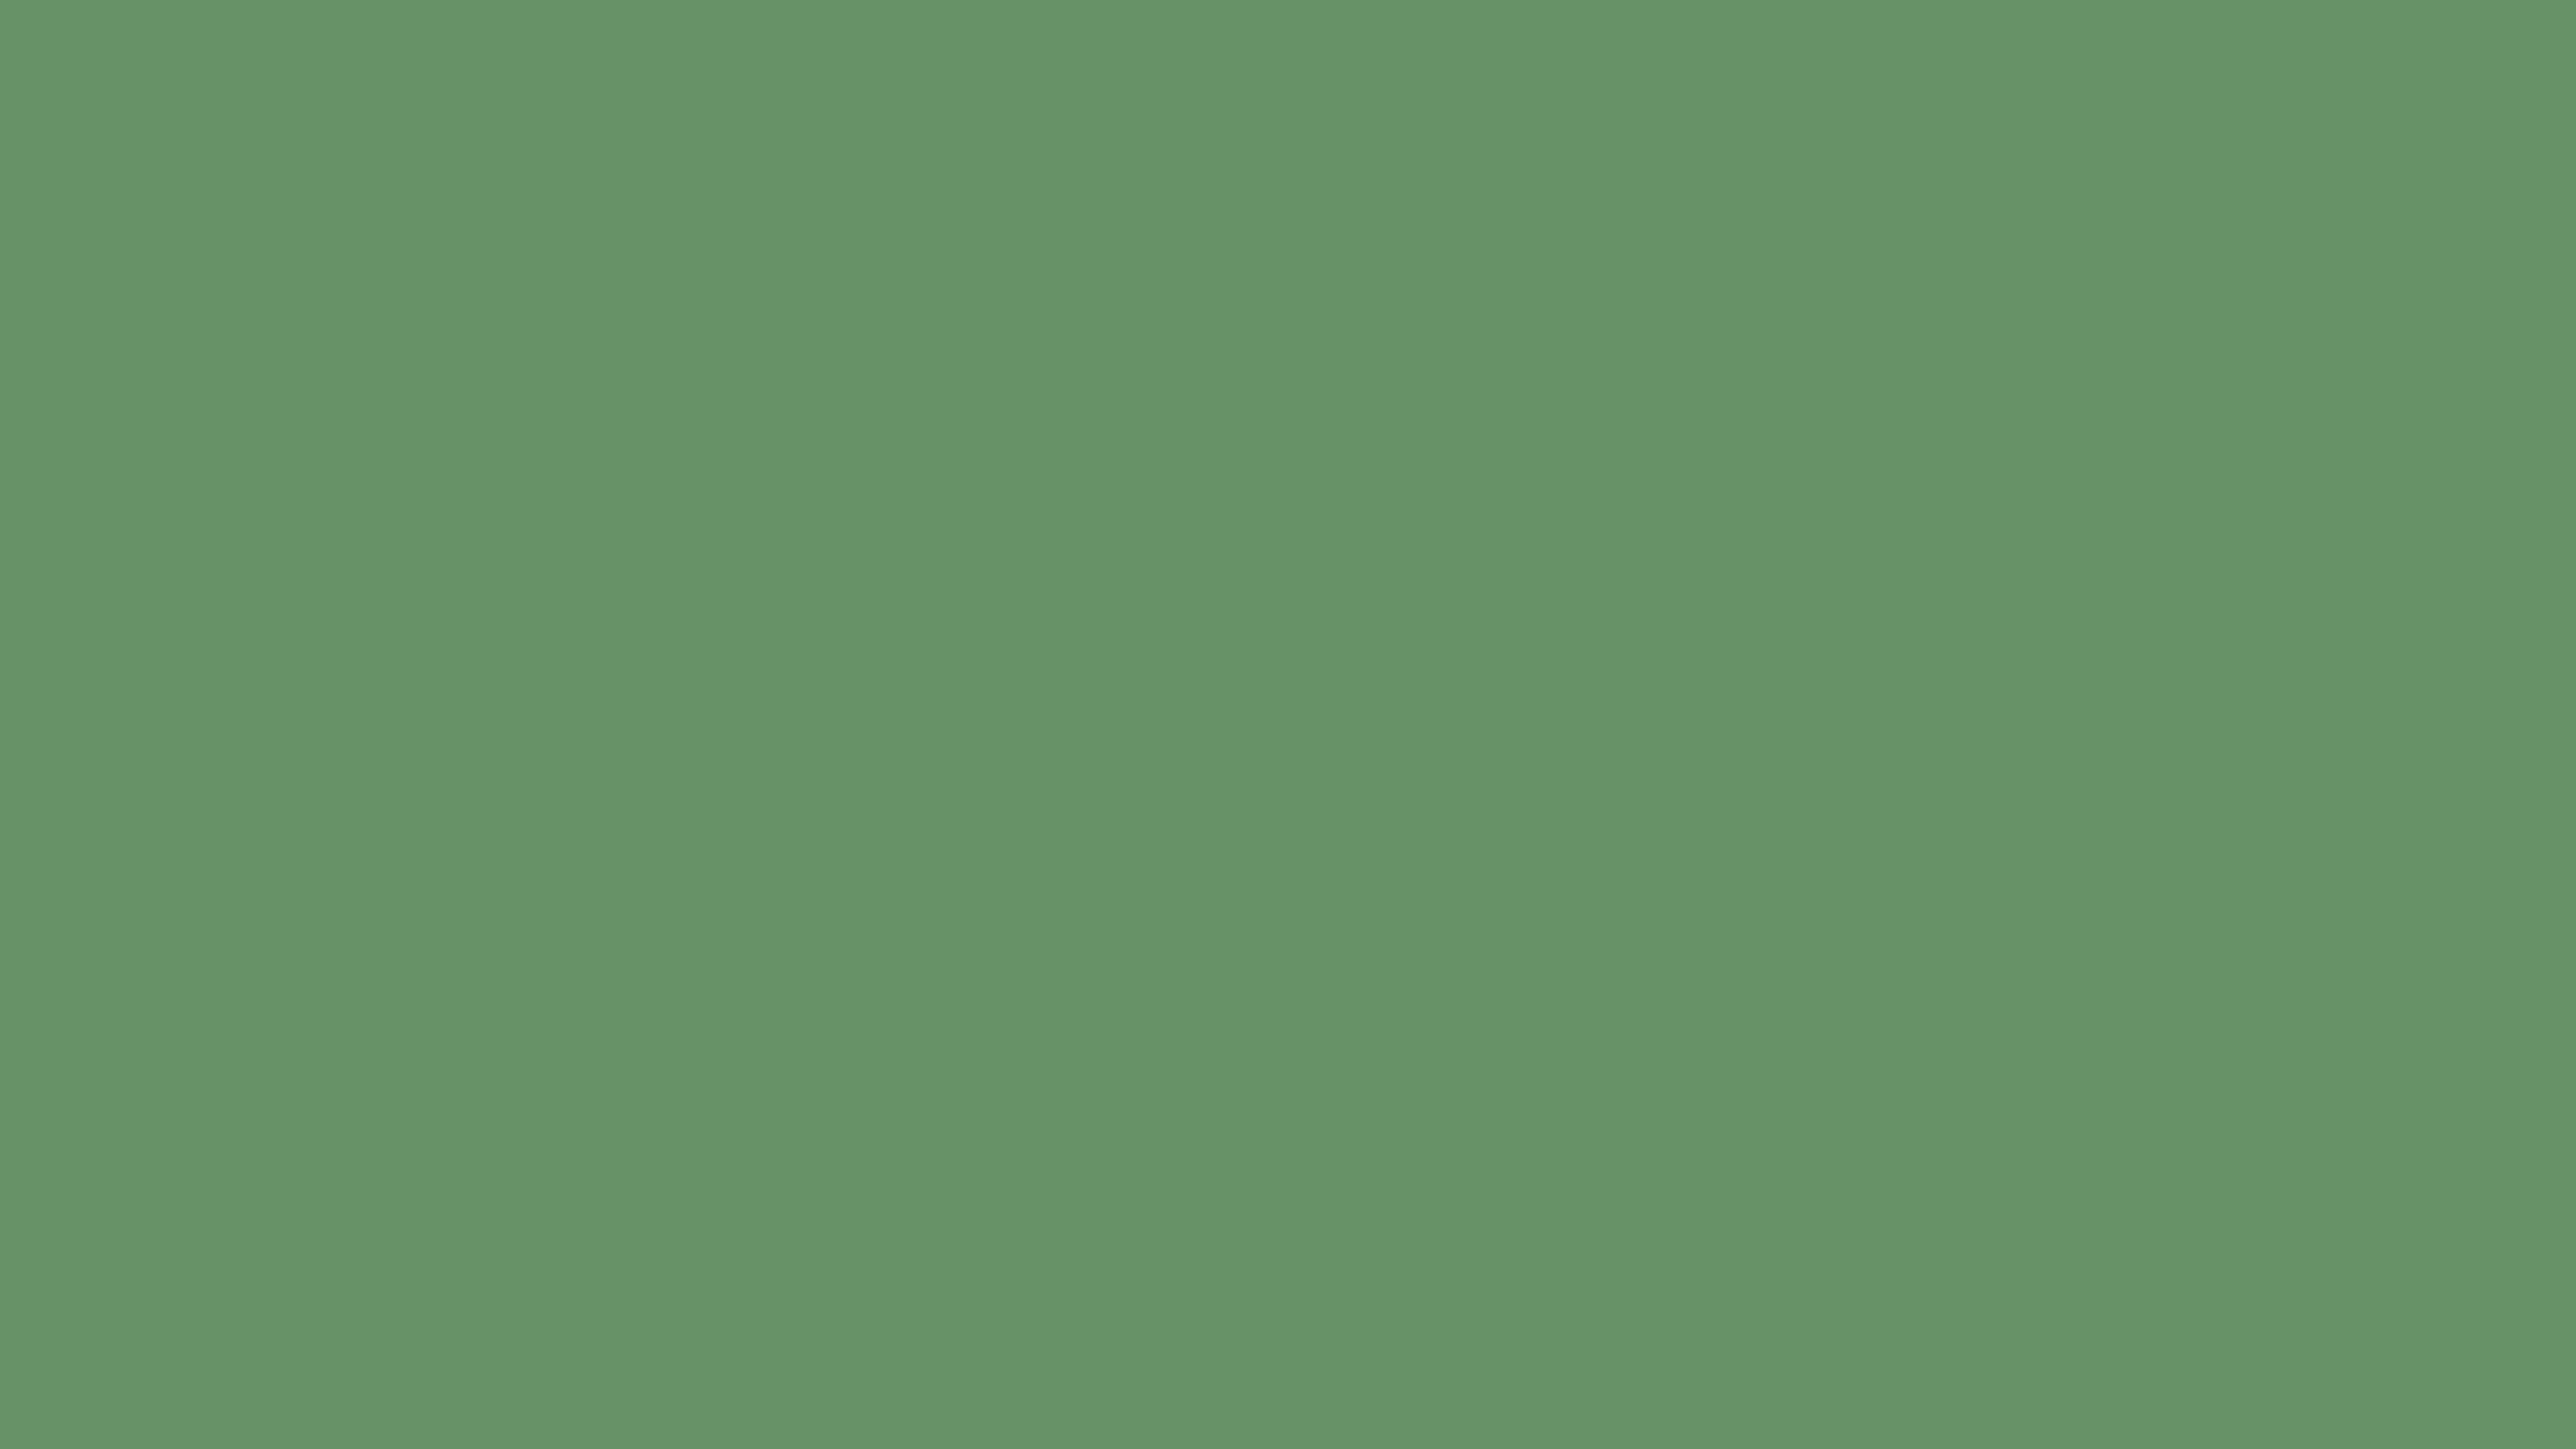 3840x2160 Russian Green Solid Color Background